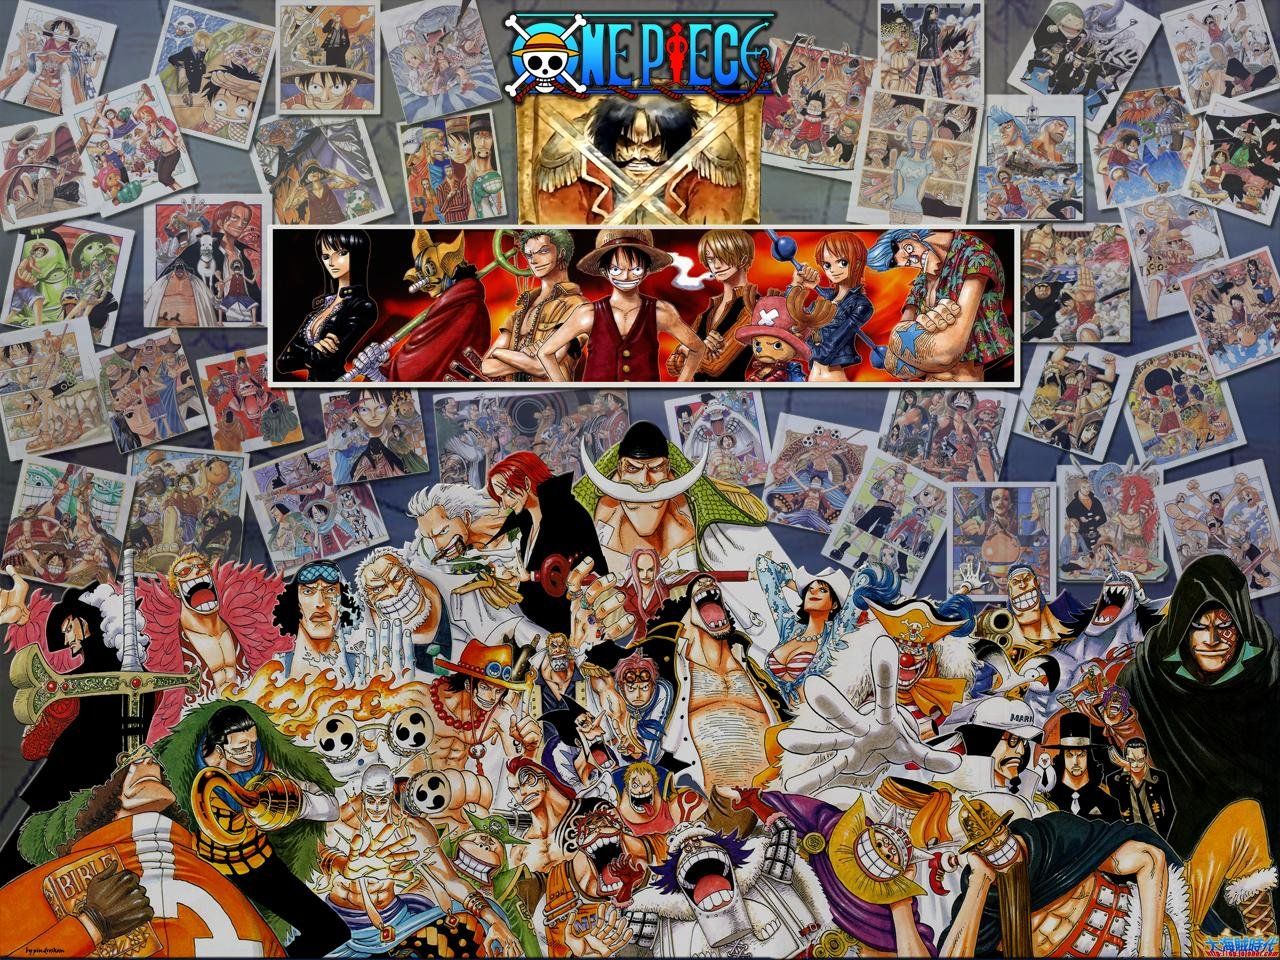 Free download Franky Wallpaper 16 One Piece All Characters Anime Manga Wallpaper [1280x960] for your Desktop, Mobile & Tablet. Explore All Anime Wallpaper. Anime Desktop Wallpaper, Free Anime Picture